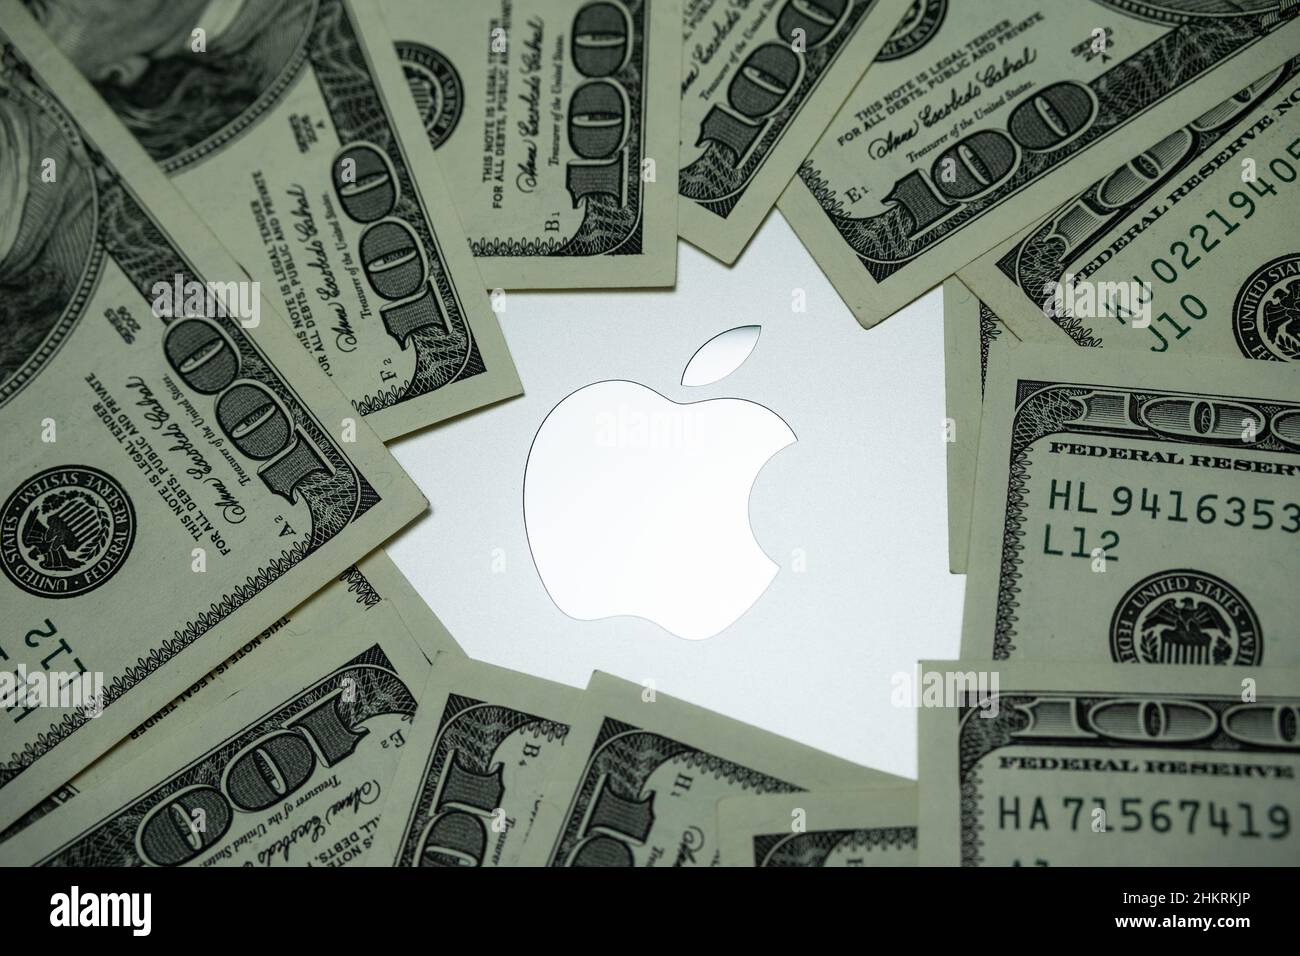 Apple company logo seen on Macbook M1 laptop surrounded by US dollar banknotes. Concept. Selective focus. United Kingdom, Stafford, December 18, 2021. Stock Photo